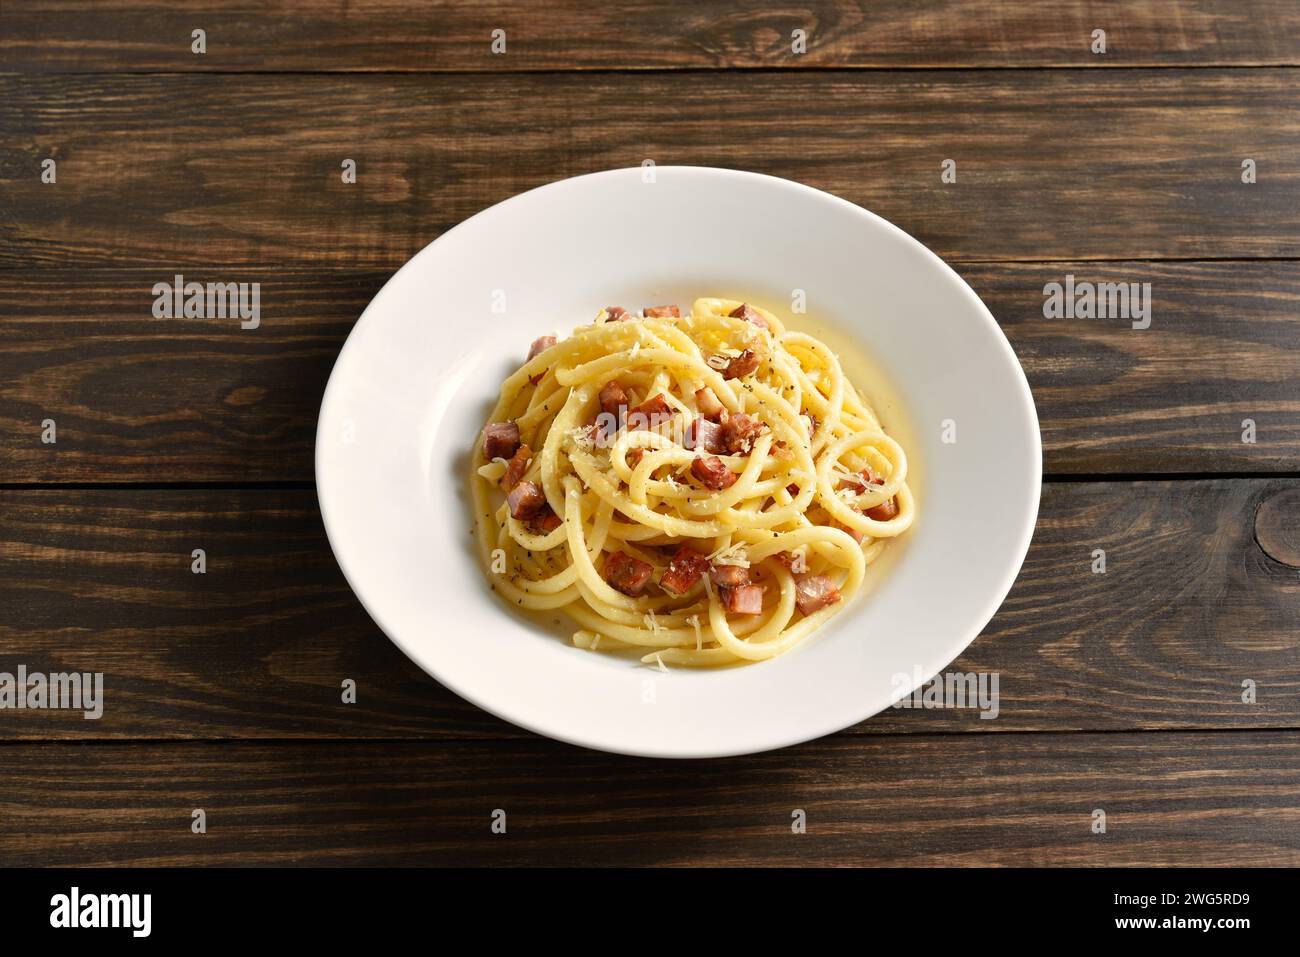 Carbonara pasta, spaghetti with crisp pancetta bacon and black pepper on white plate over rustic wooden background. Close up view Stock Photo